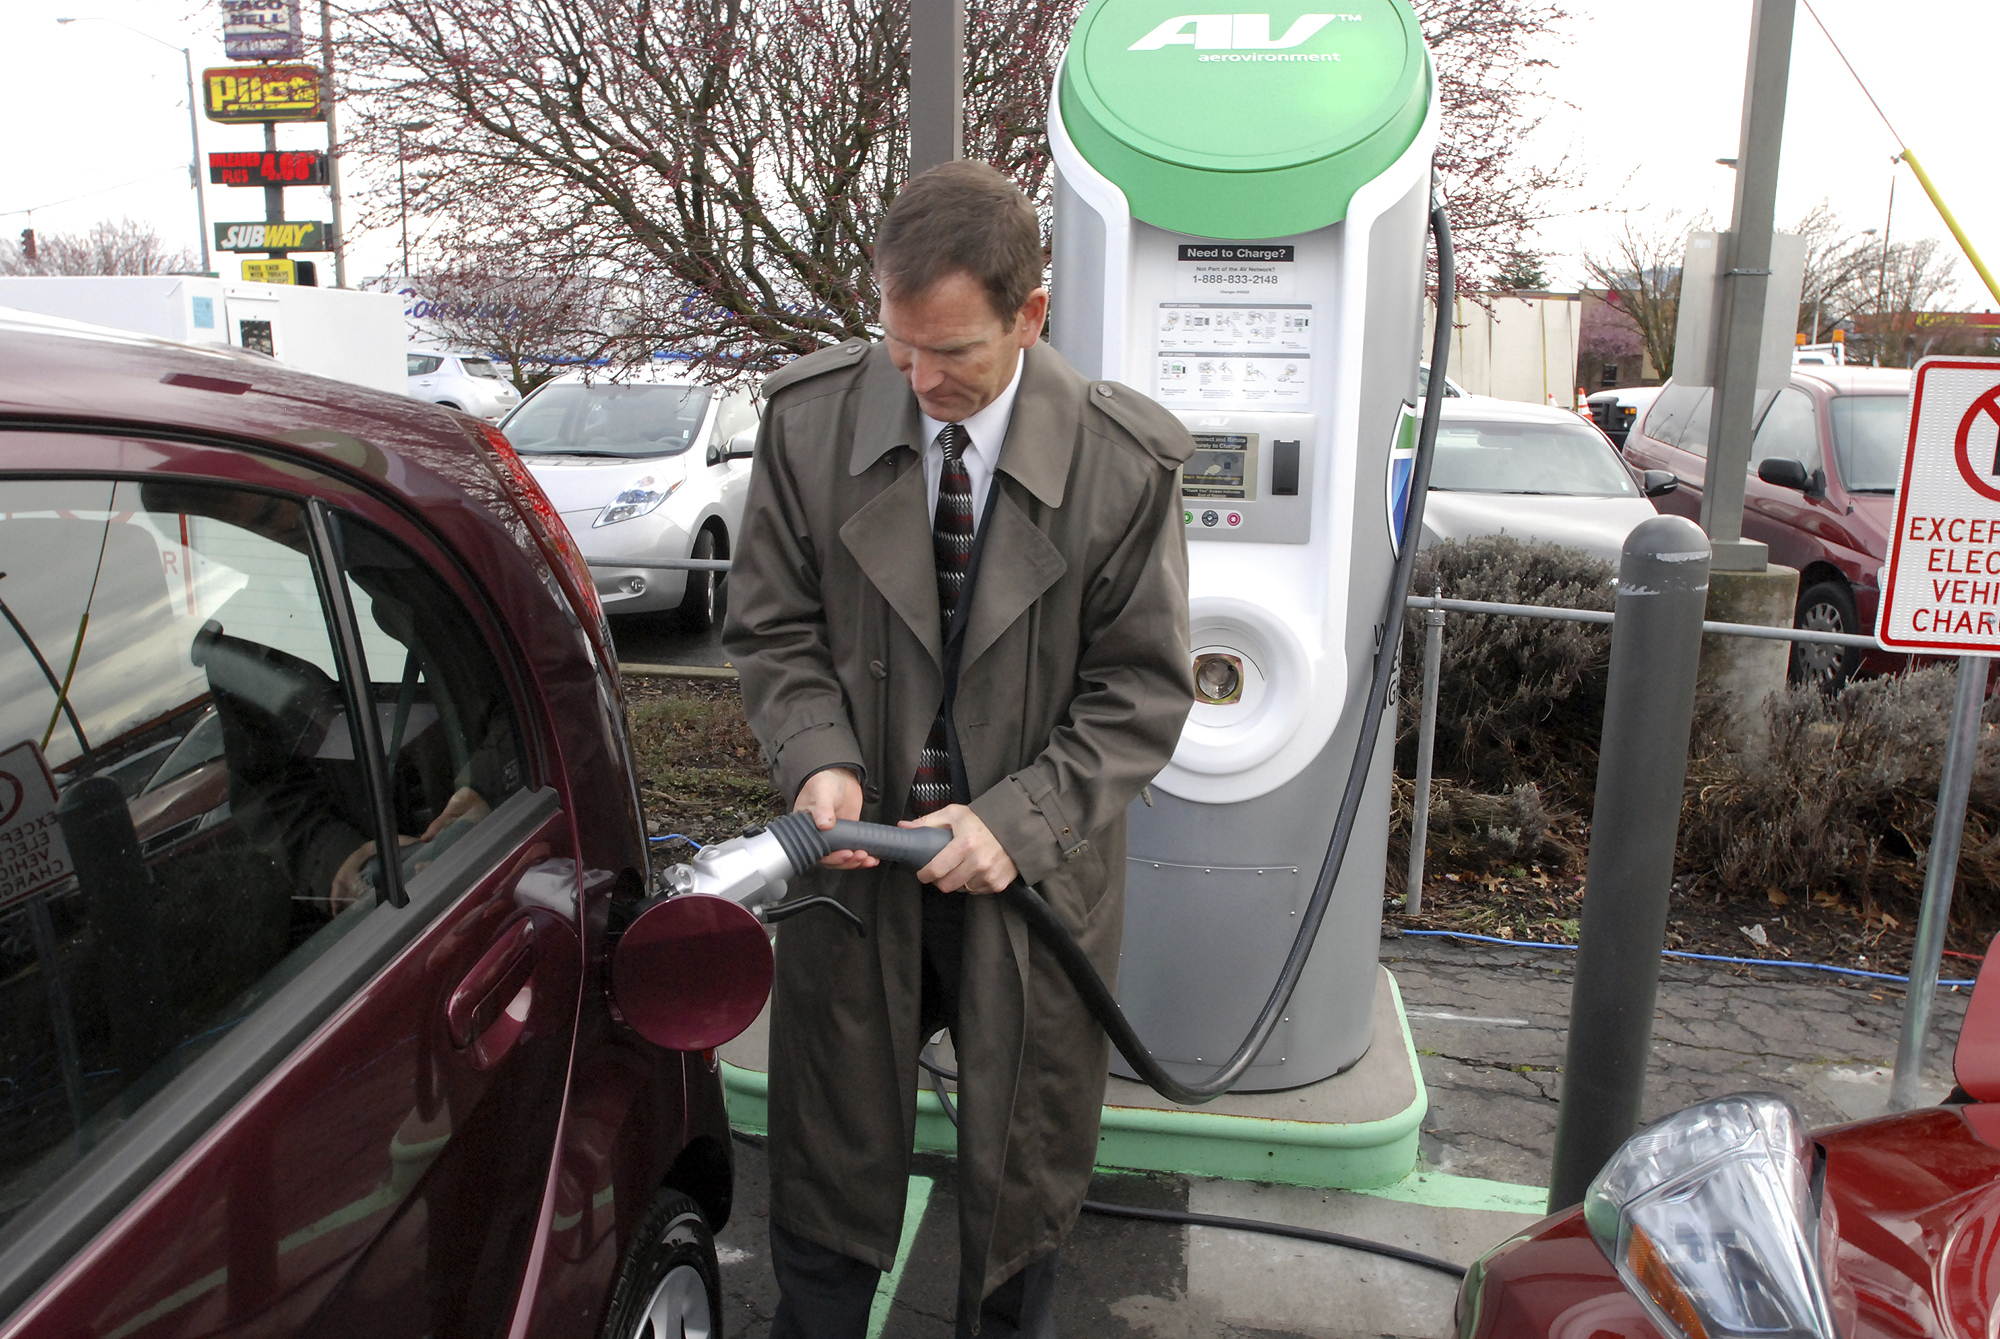 Could This Be The EV Charging Station Of The Future?